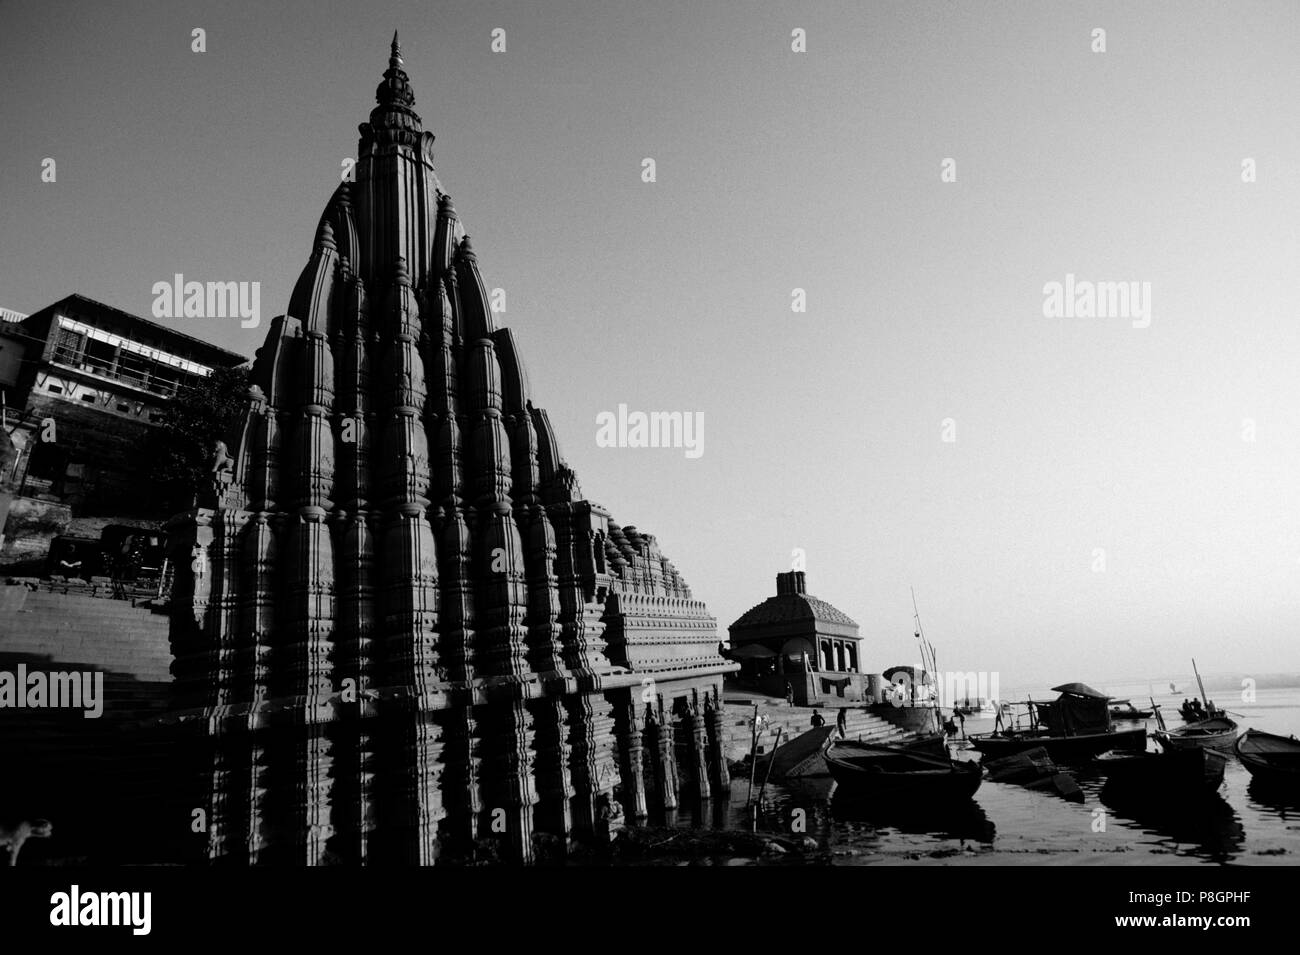 A HINDU TEMPLE rises above CANOES on the GANGES RIVER - VARANASI (BENARES), INDIA Stock Photo